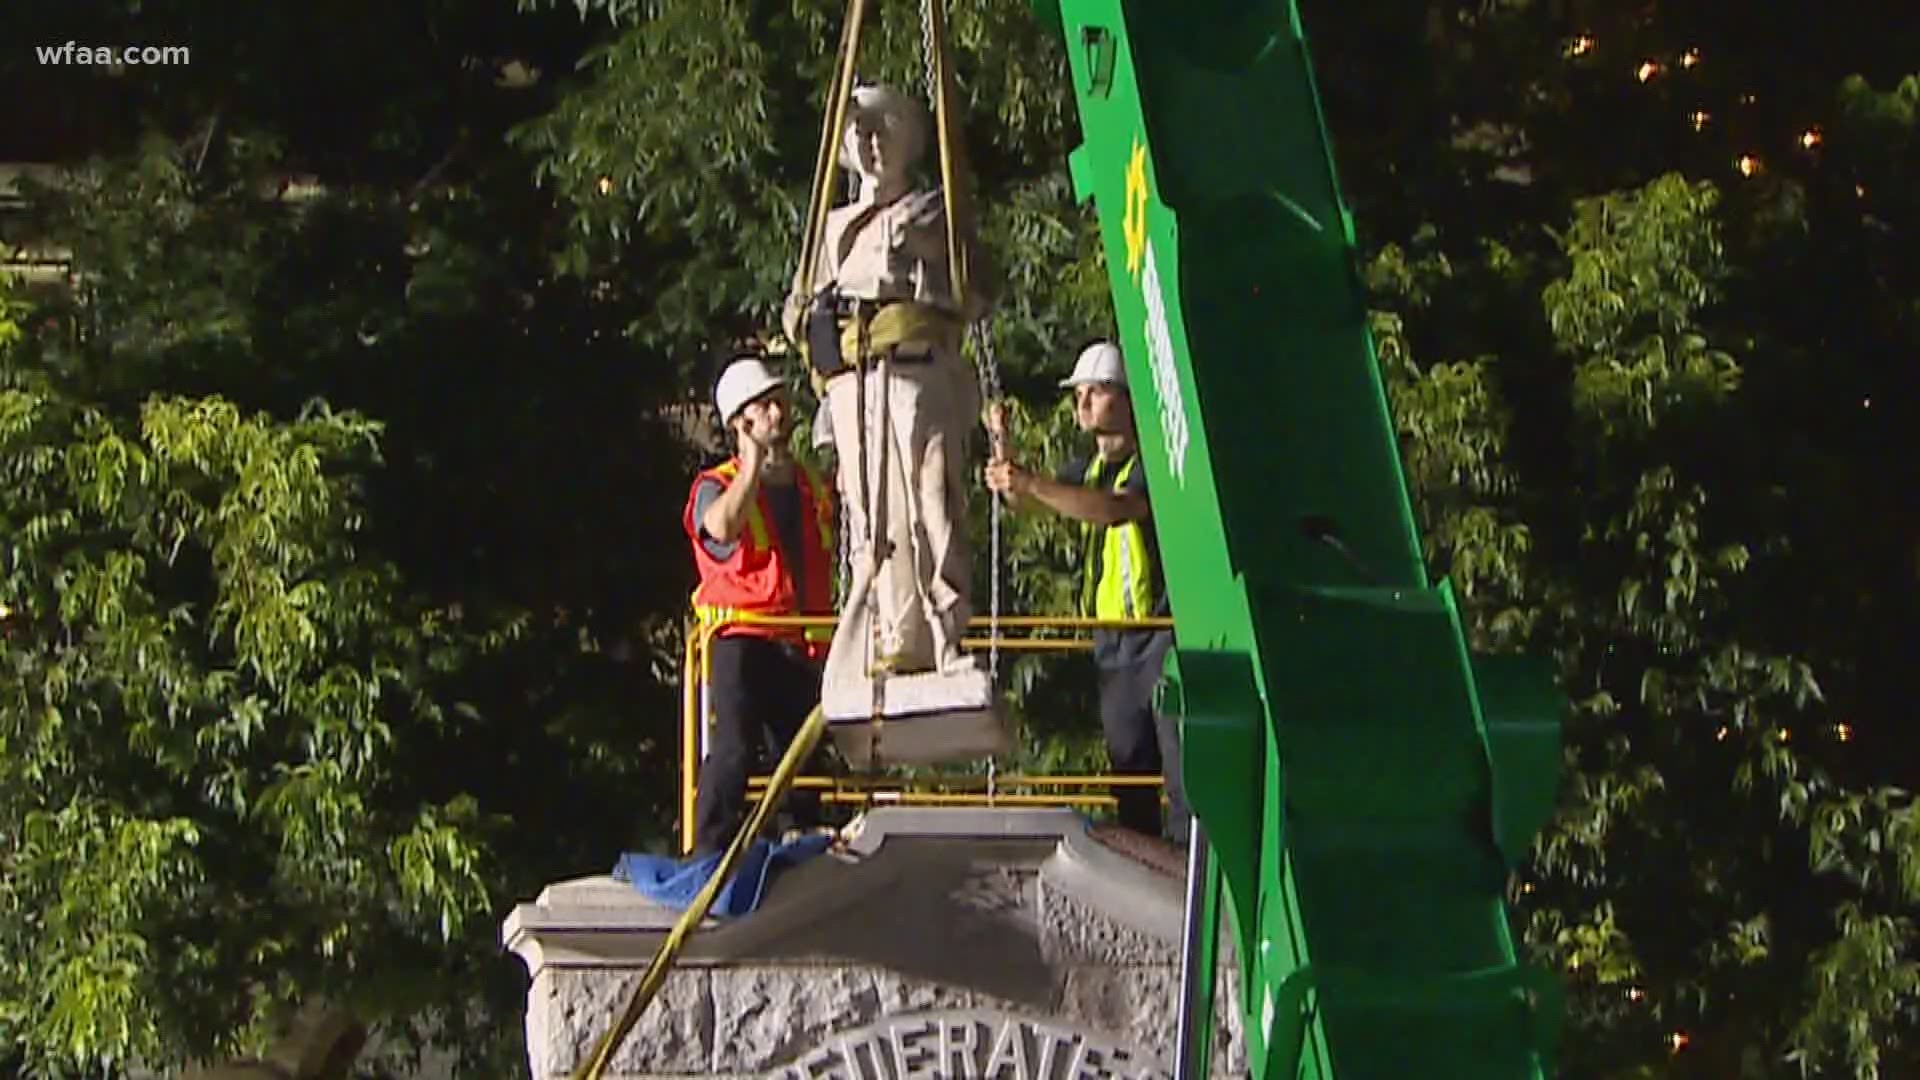 A Confederate monument in the Denton town square was taken down early June 25. In Dallas, the monument in Pioneer Park is dismantled.